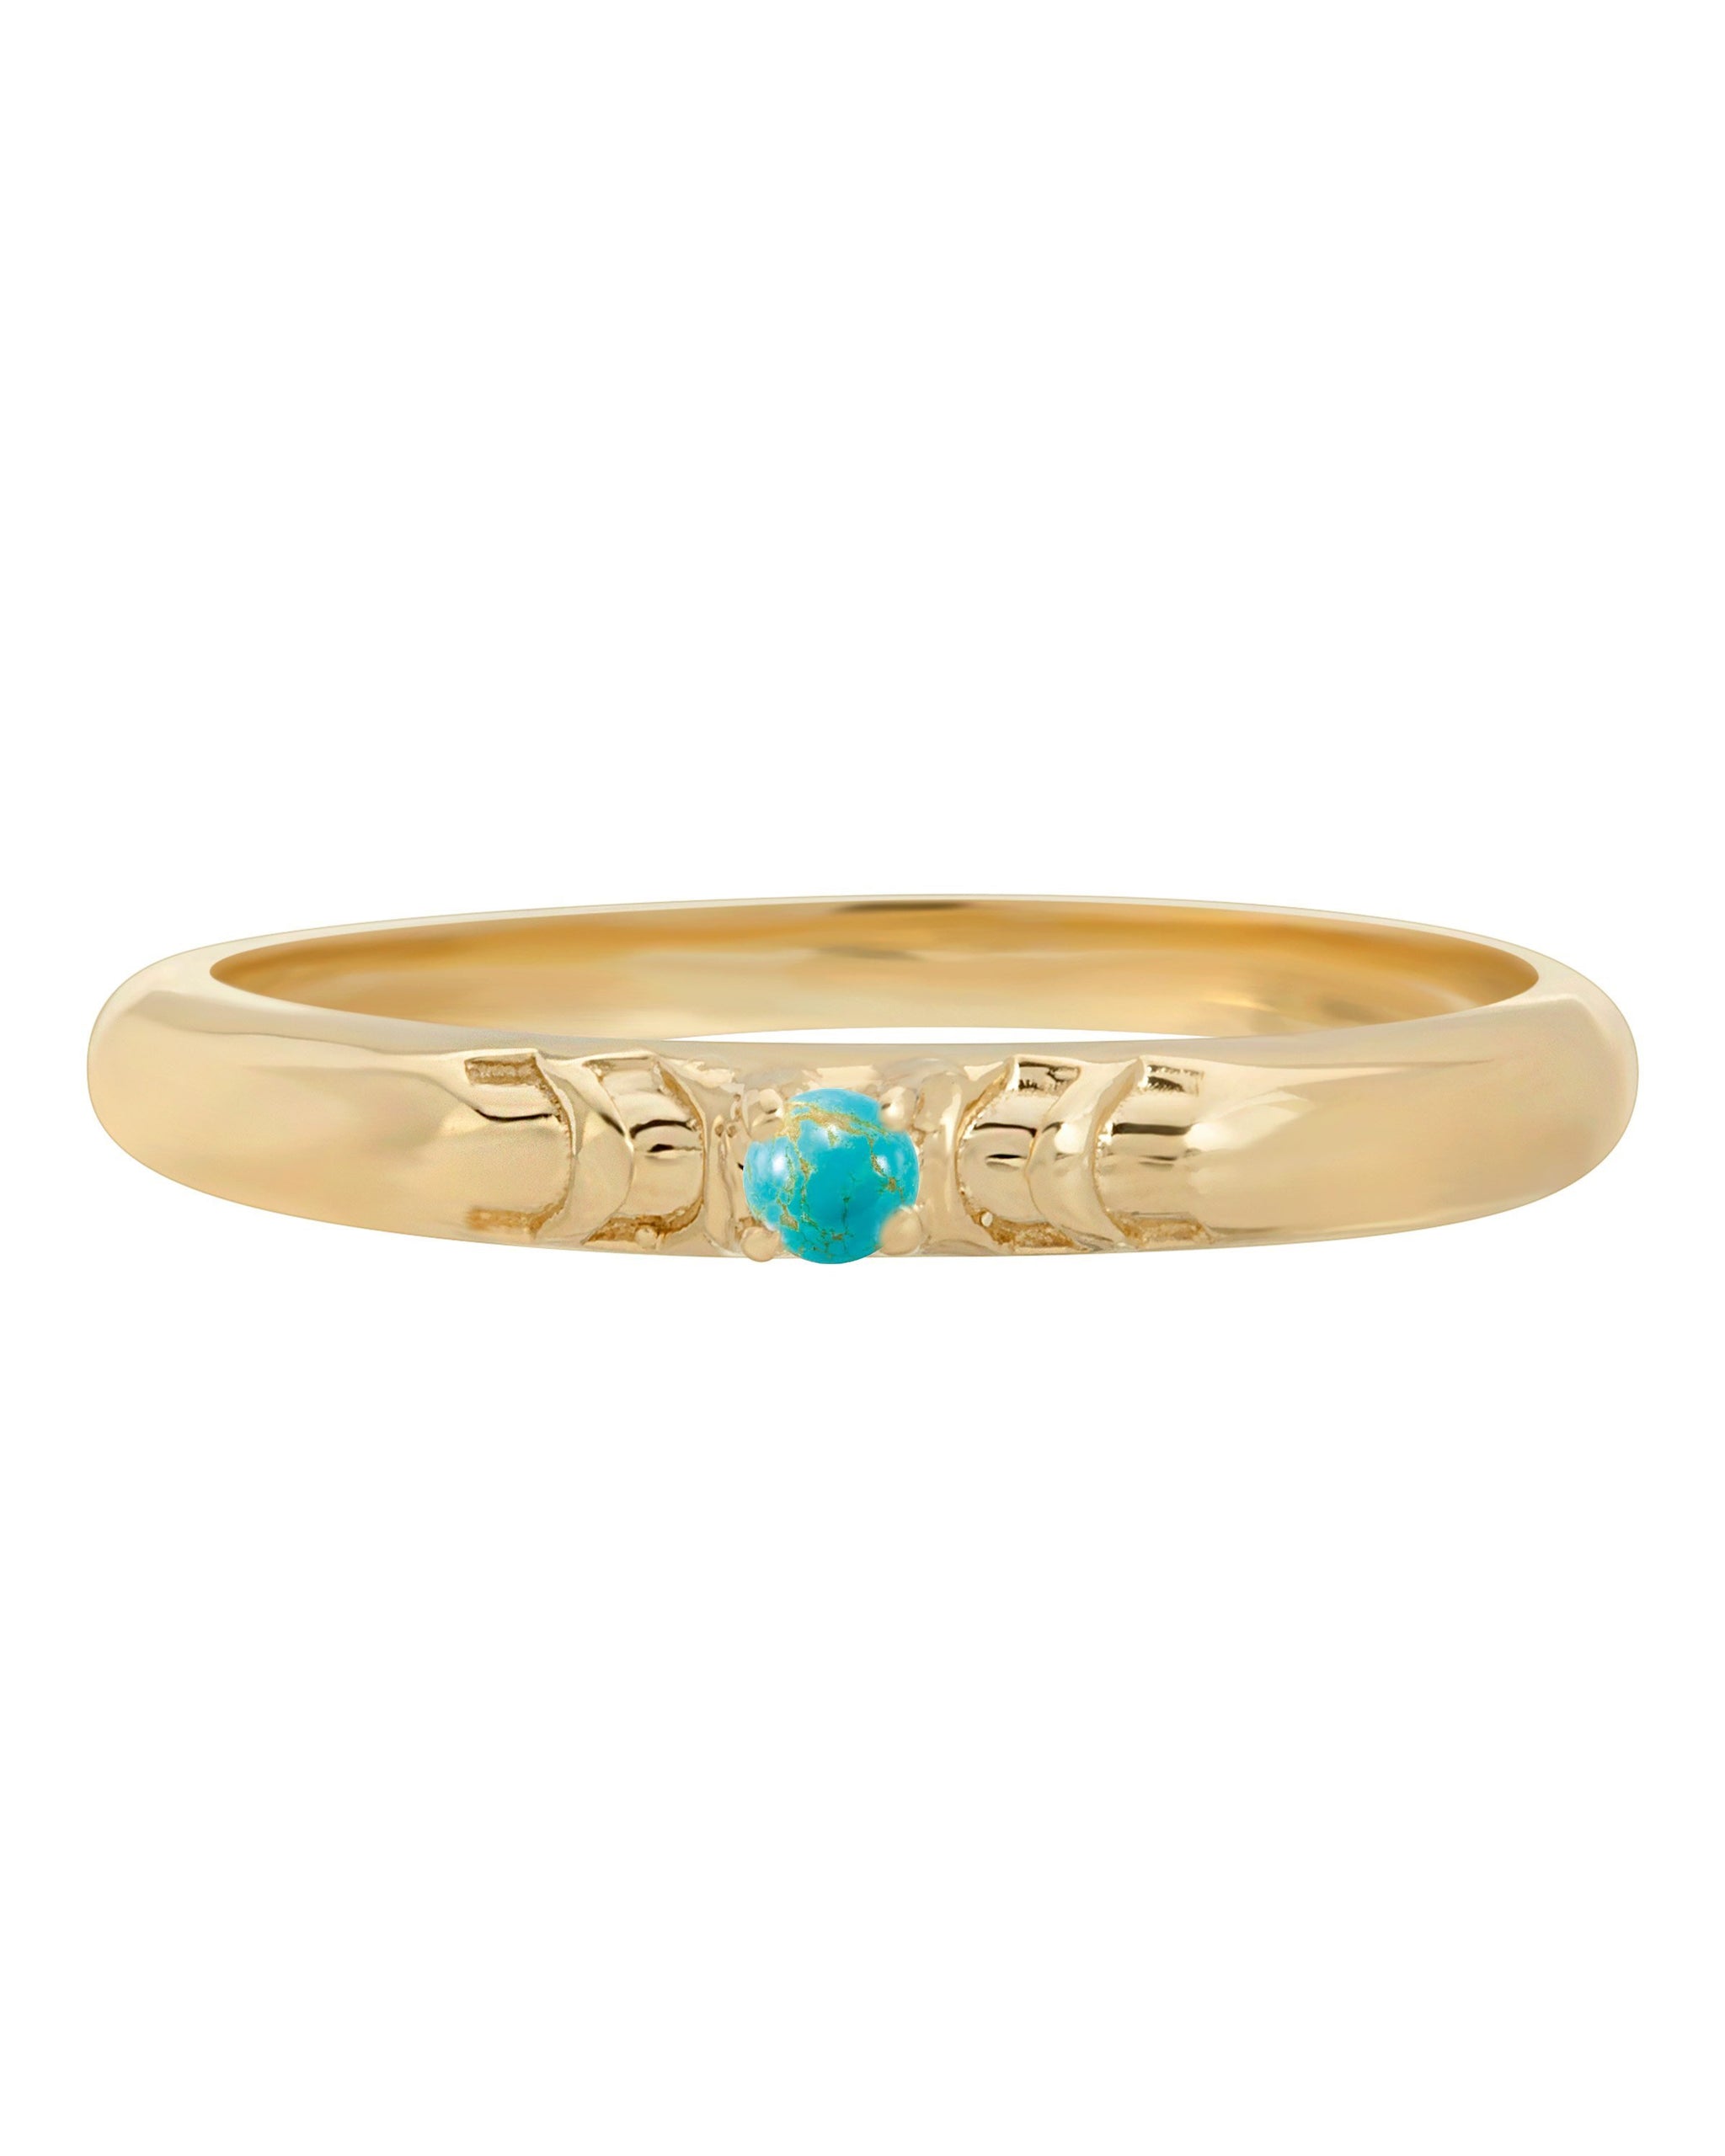 TURQUOISE ECLIPSE RING - TURQUOISE + TOBACCO